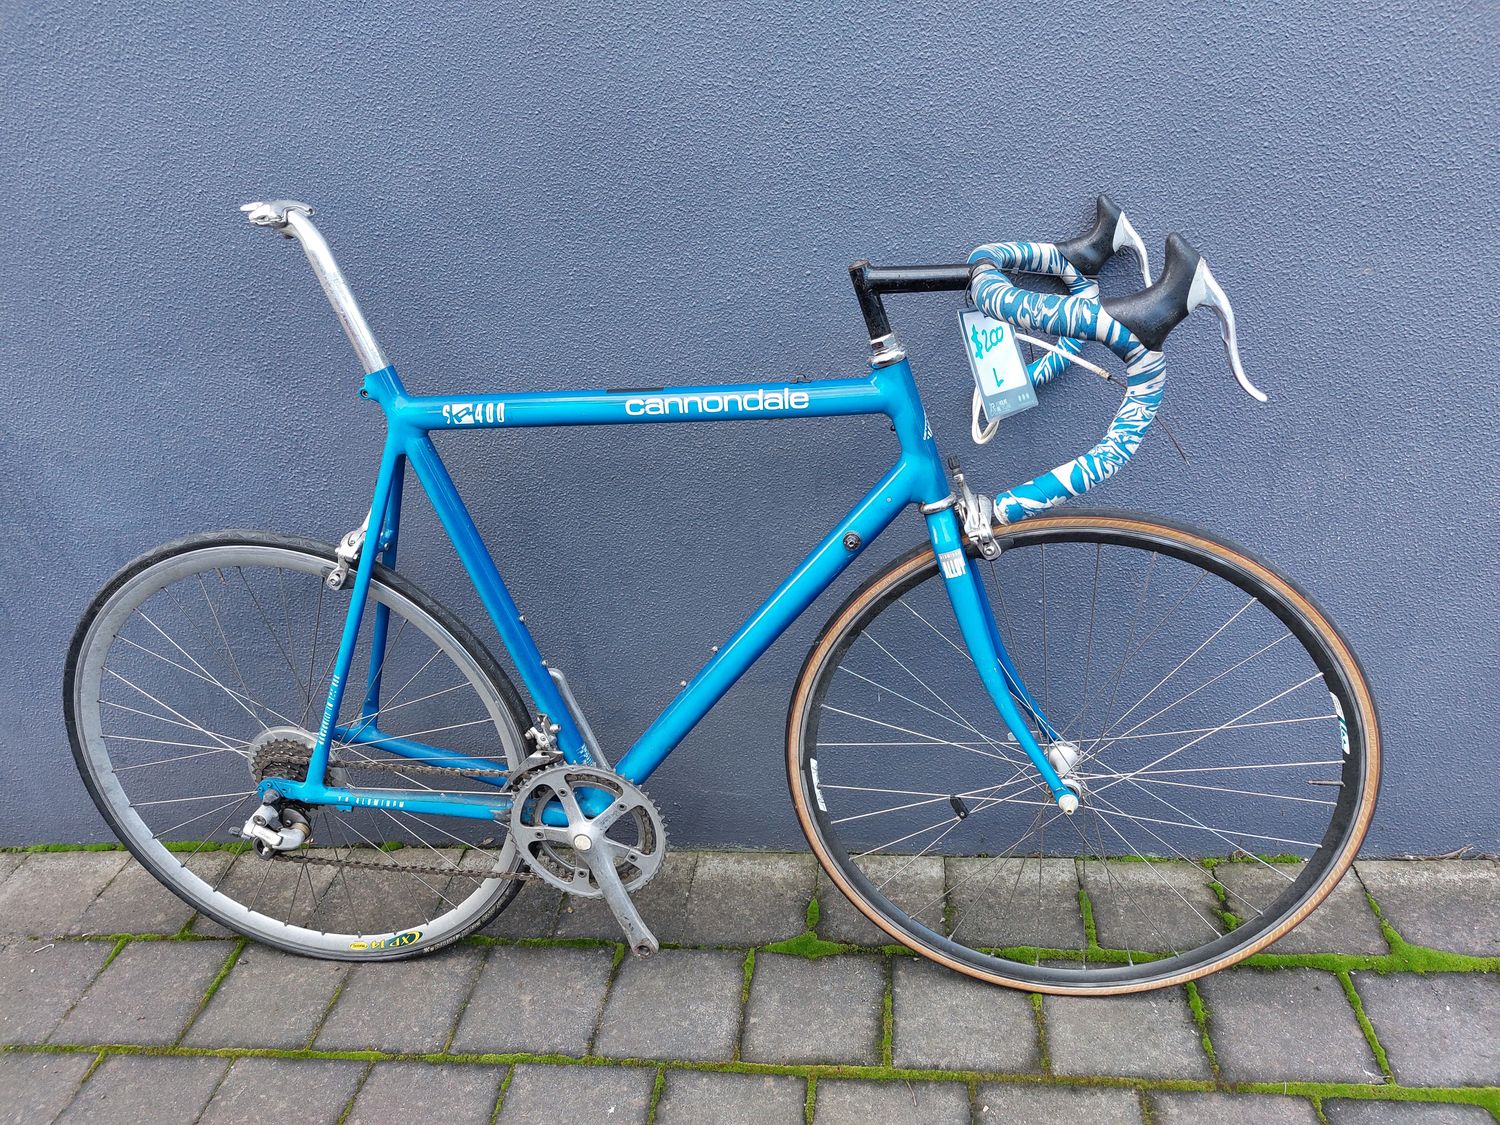 Large - Road - Cannondale SR400 - DIY/PROJECT BIKE - SOLD AS IS